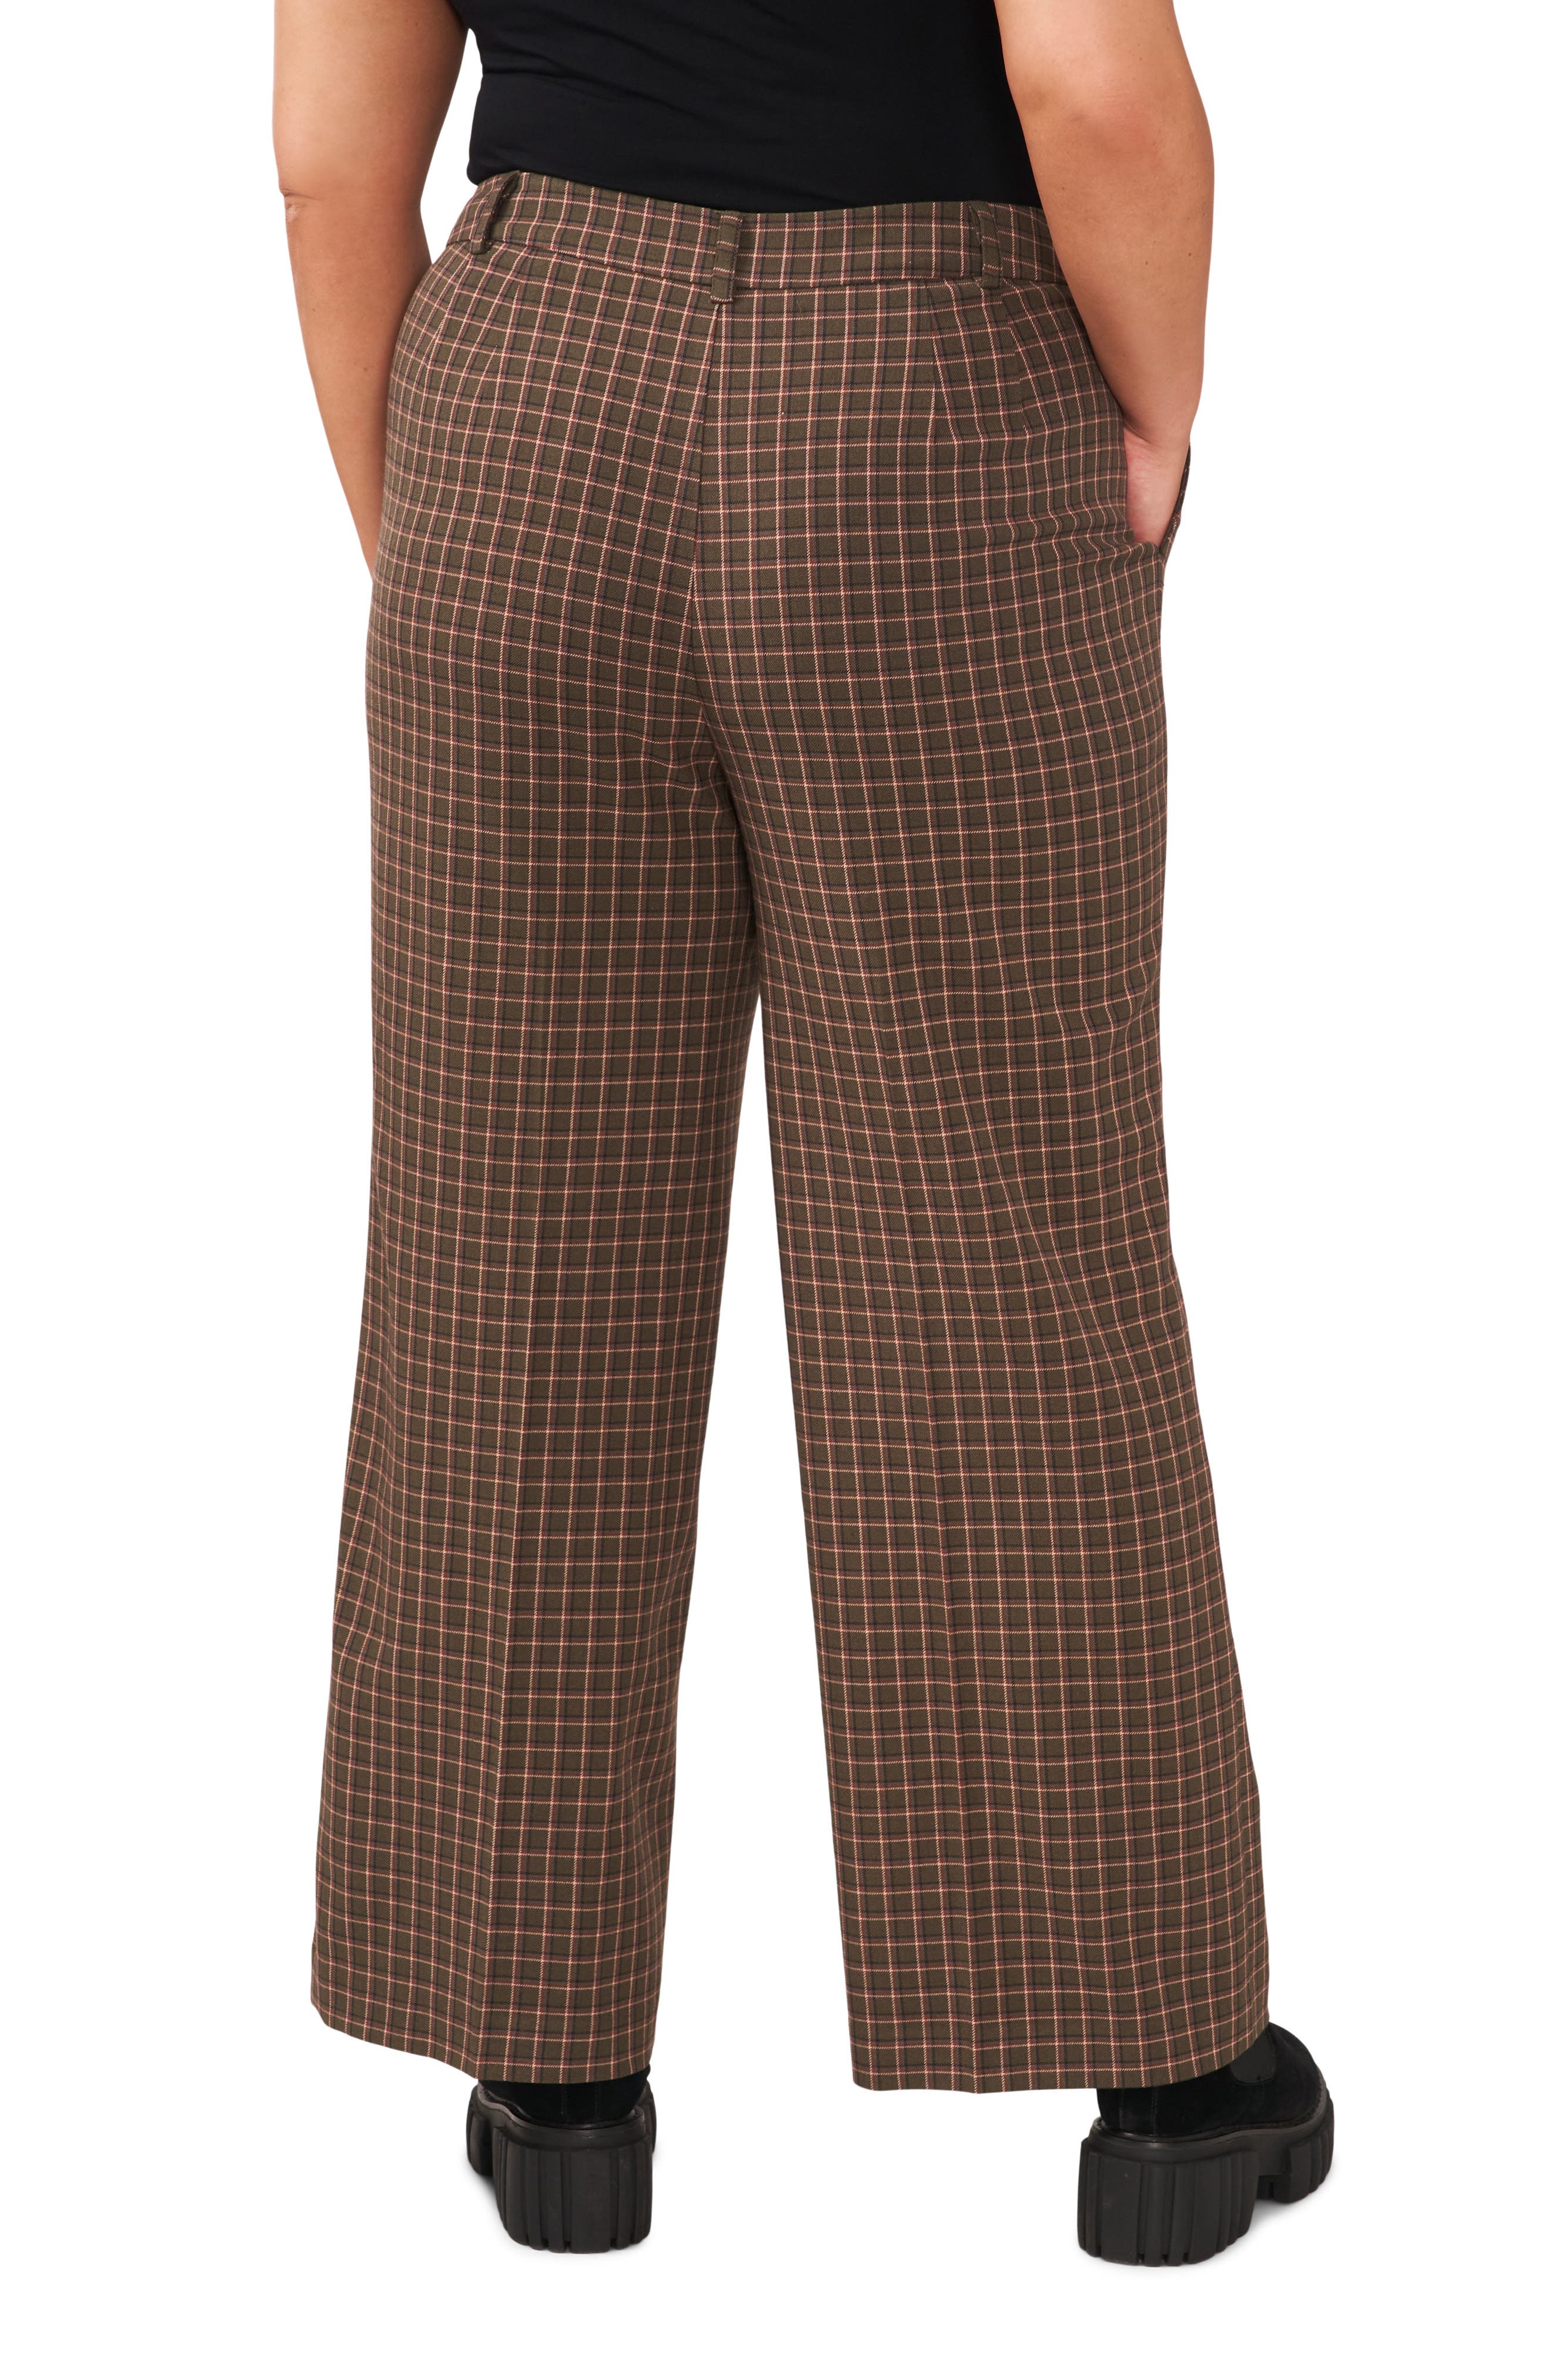 Vince Camuto Tailored Pants w/ Large Cuff